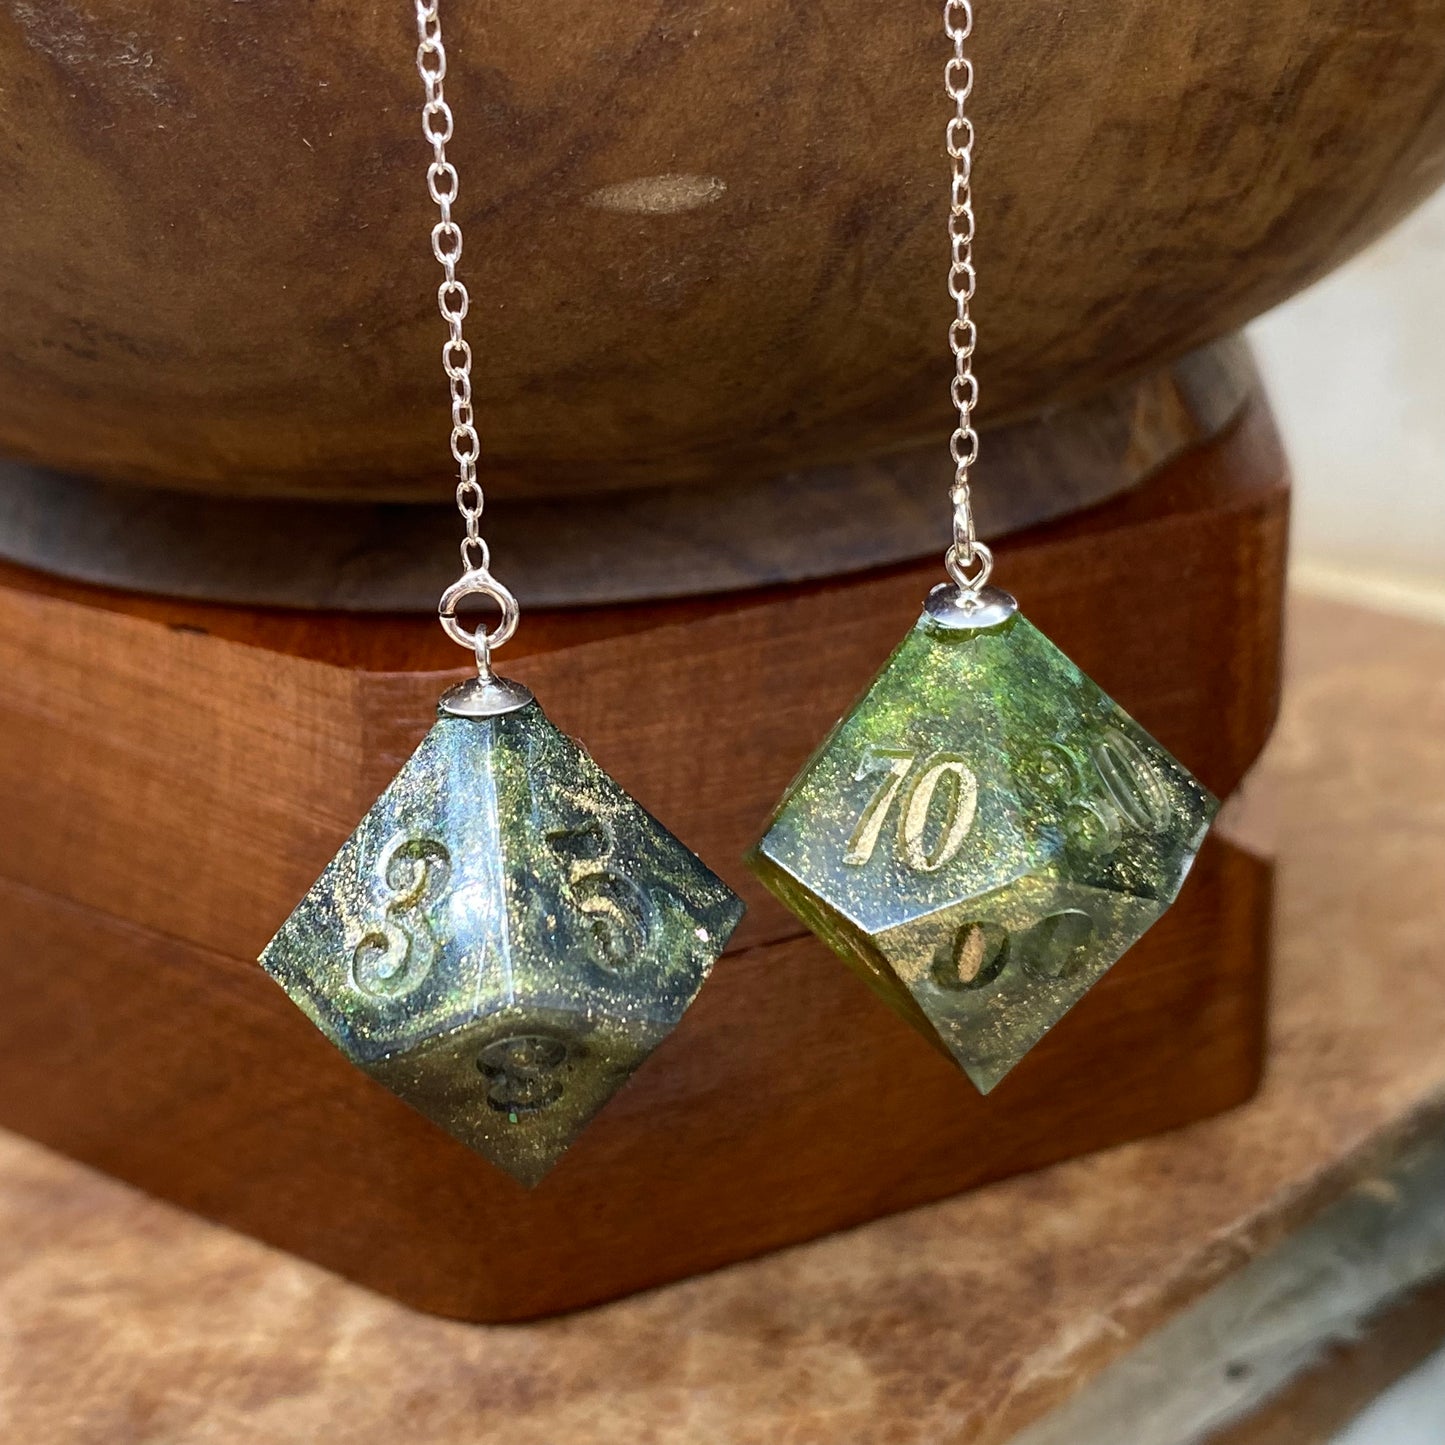 Green and Gold D%/ D10 Earrings